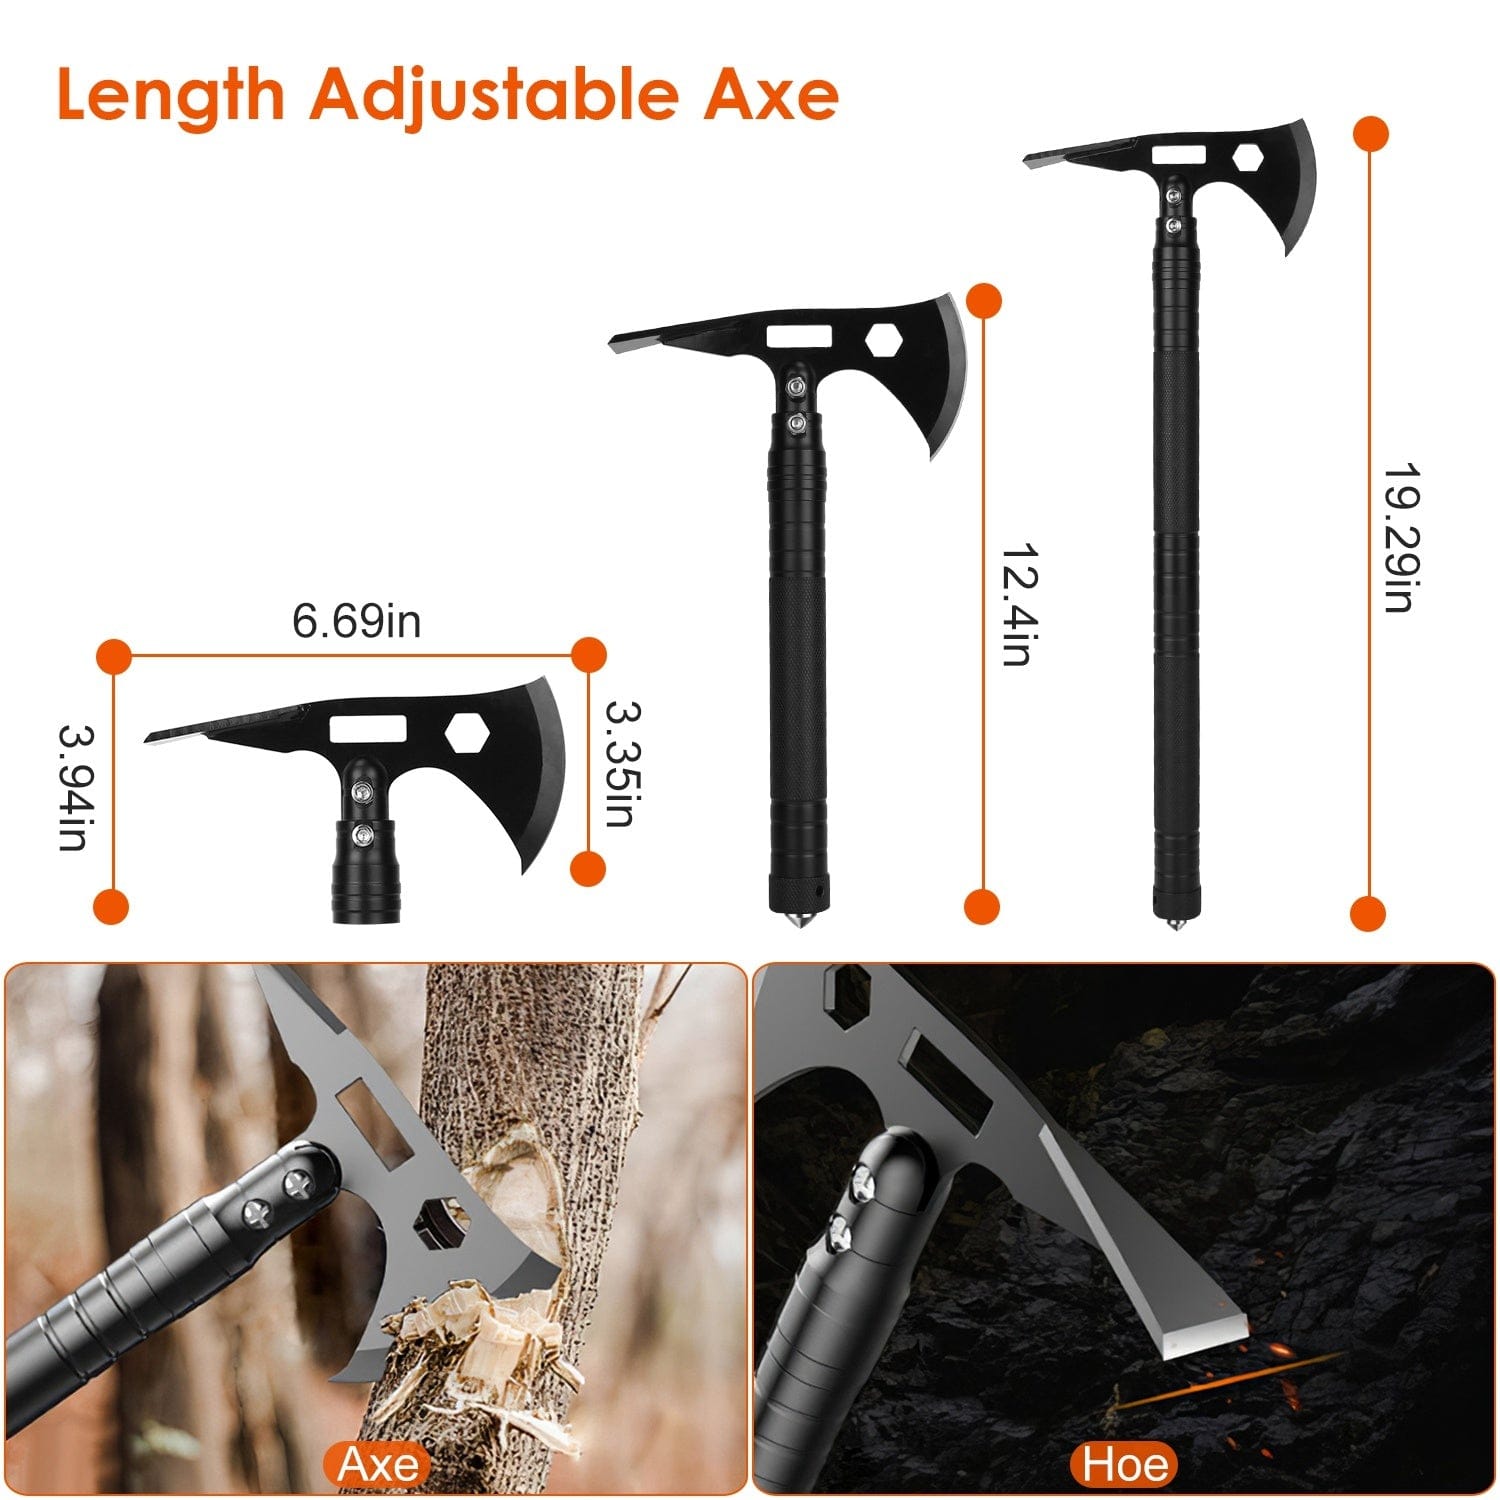 Ultimate Multifunctional Shovel Axe Set for Camping and Survival - Emergency Survival Gear With Extension Handles